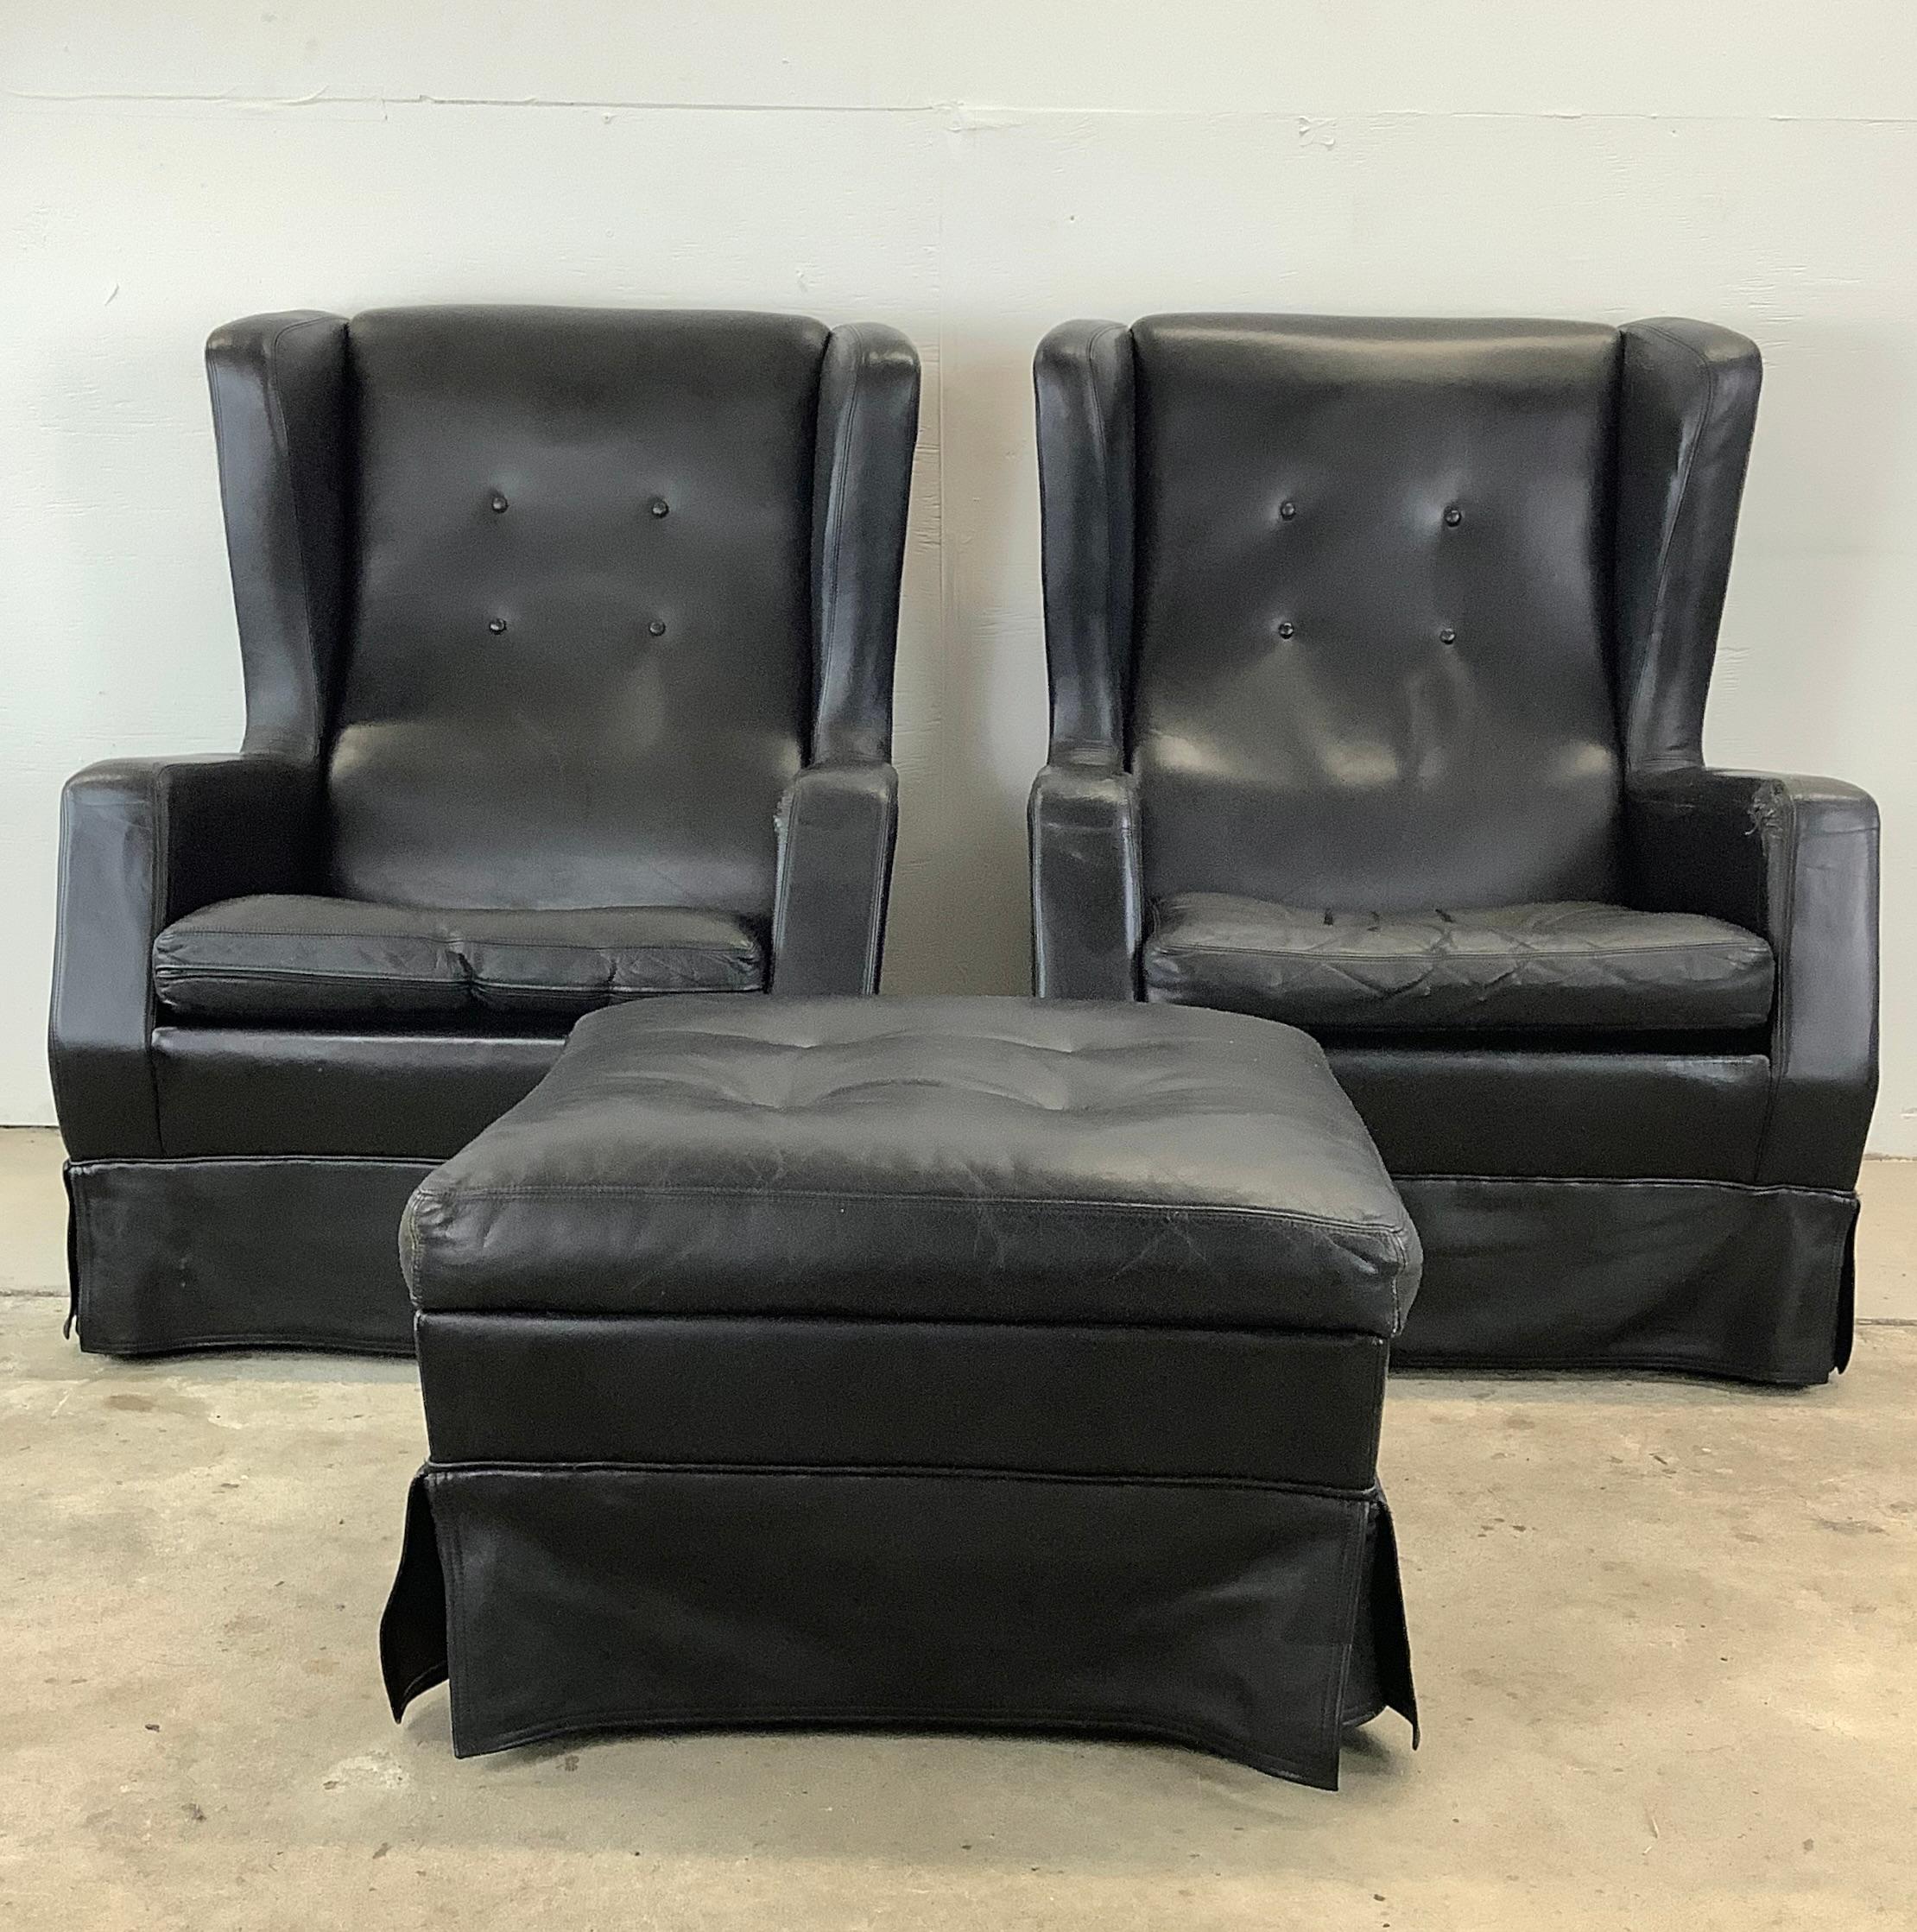 This captivating vintage seating set includes a pair of high Wingback Armchairs and matching ottoman, designed for acclaimed Dutch manufacturer Artifort by Theo Ruth. This striking pair of wingback chairs are elegantly upholstered in rich black